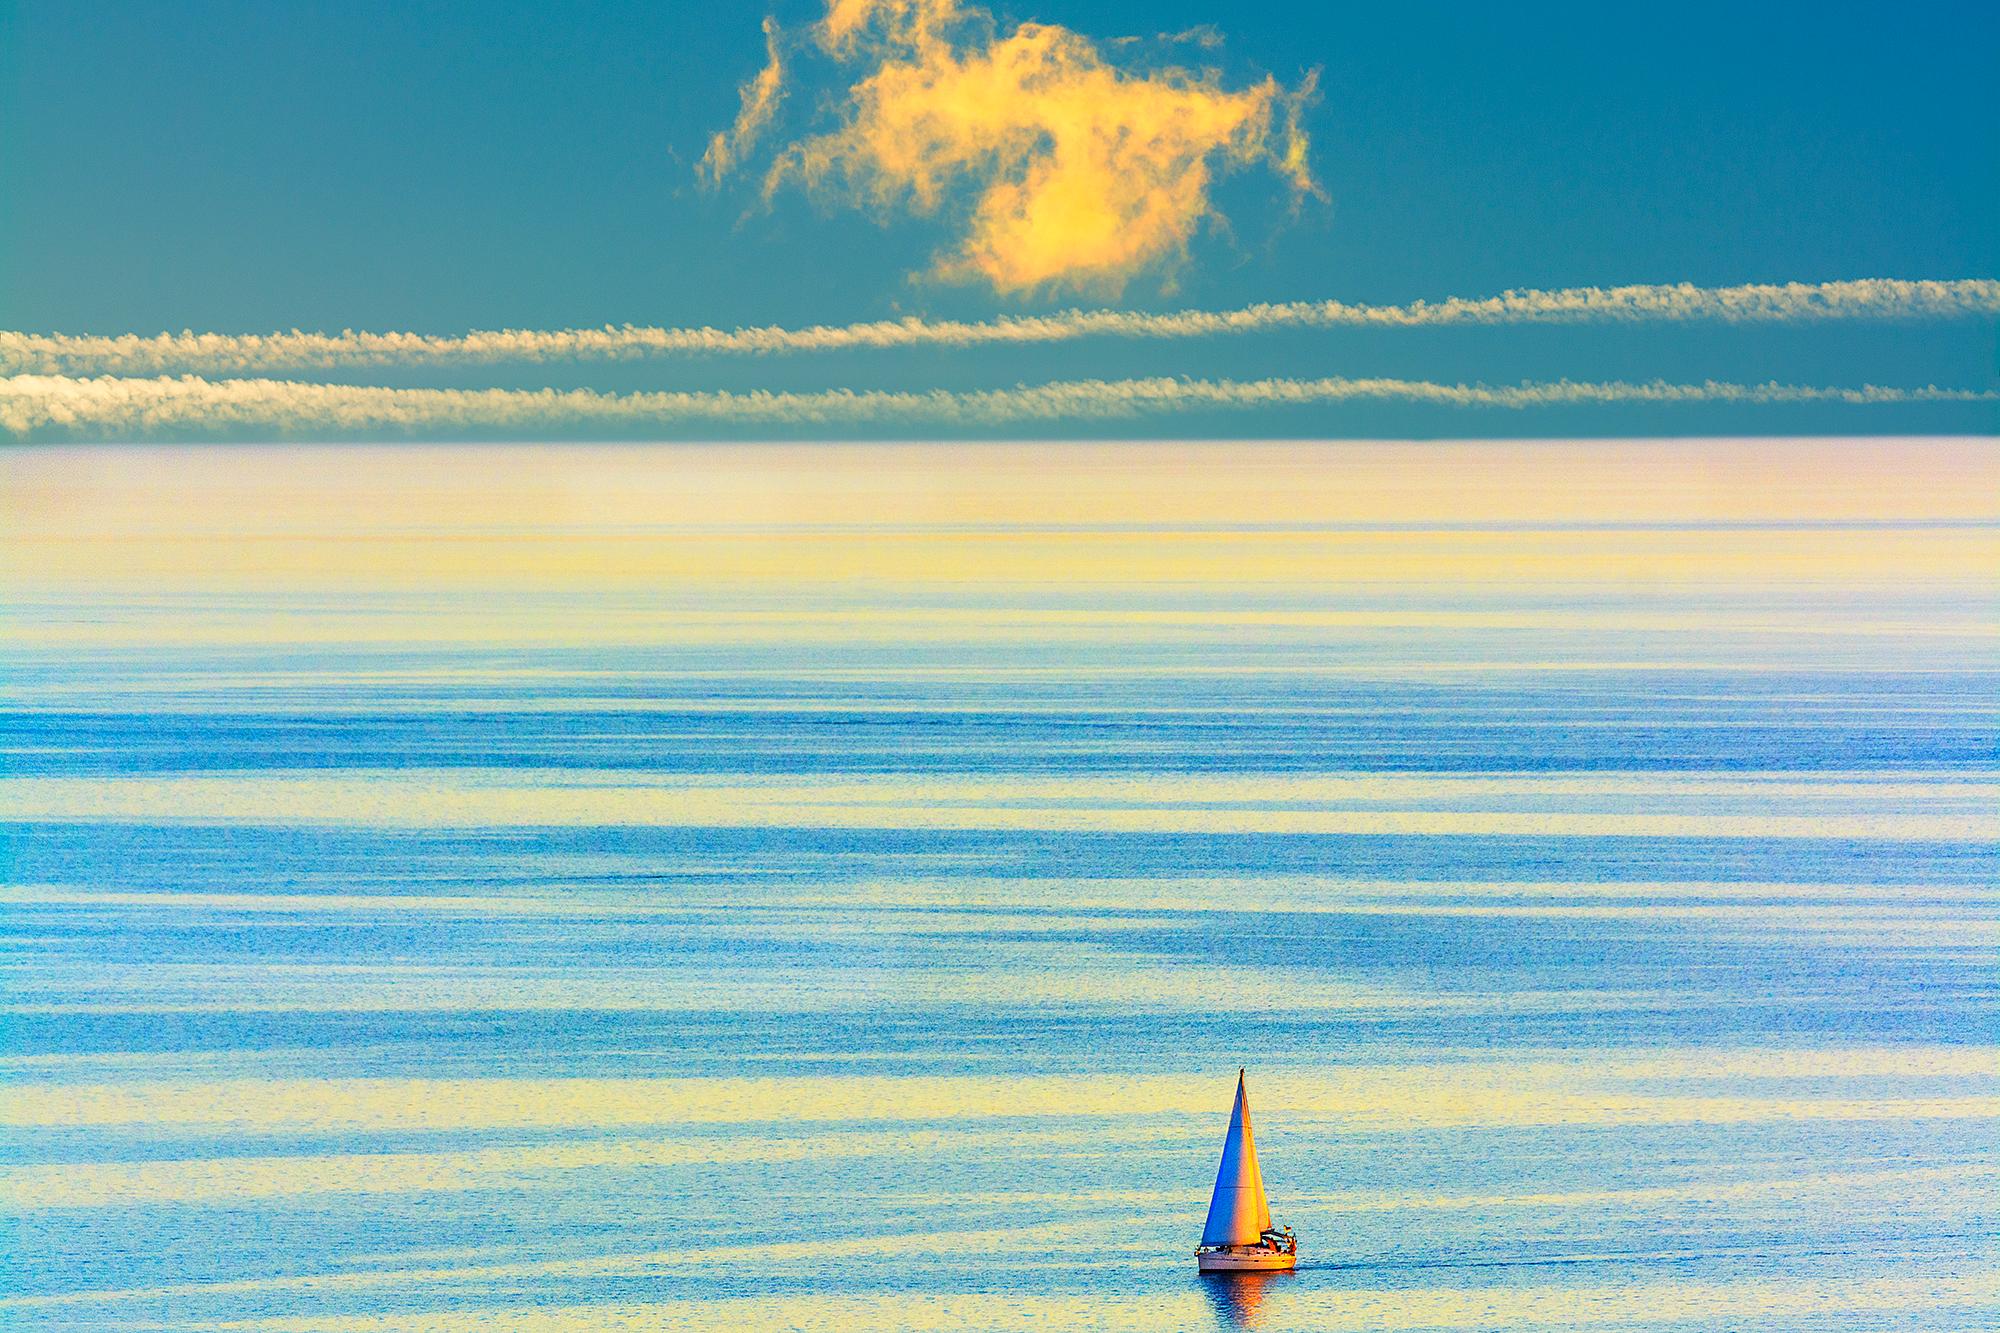 Mitchell Funk Abstract Photograph - Lone Sailboat on a placid turquoise sea